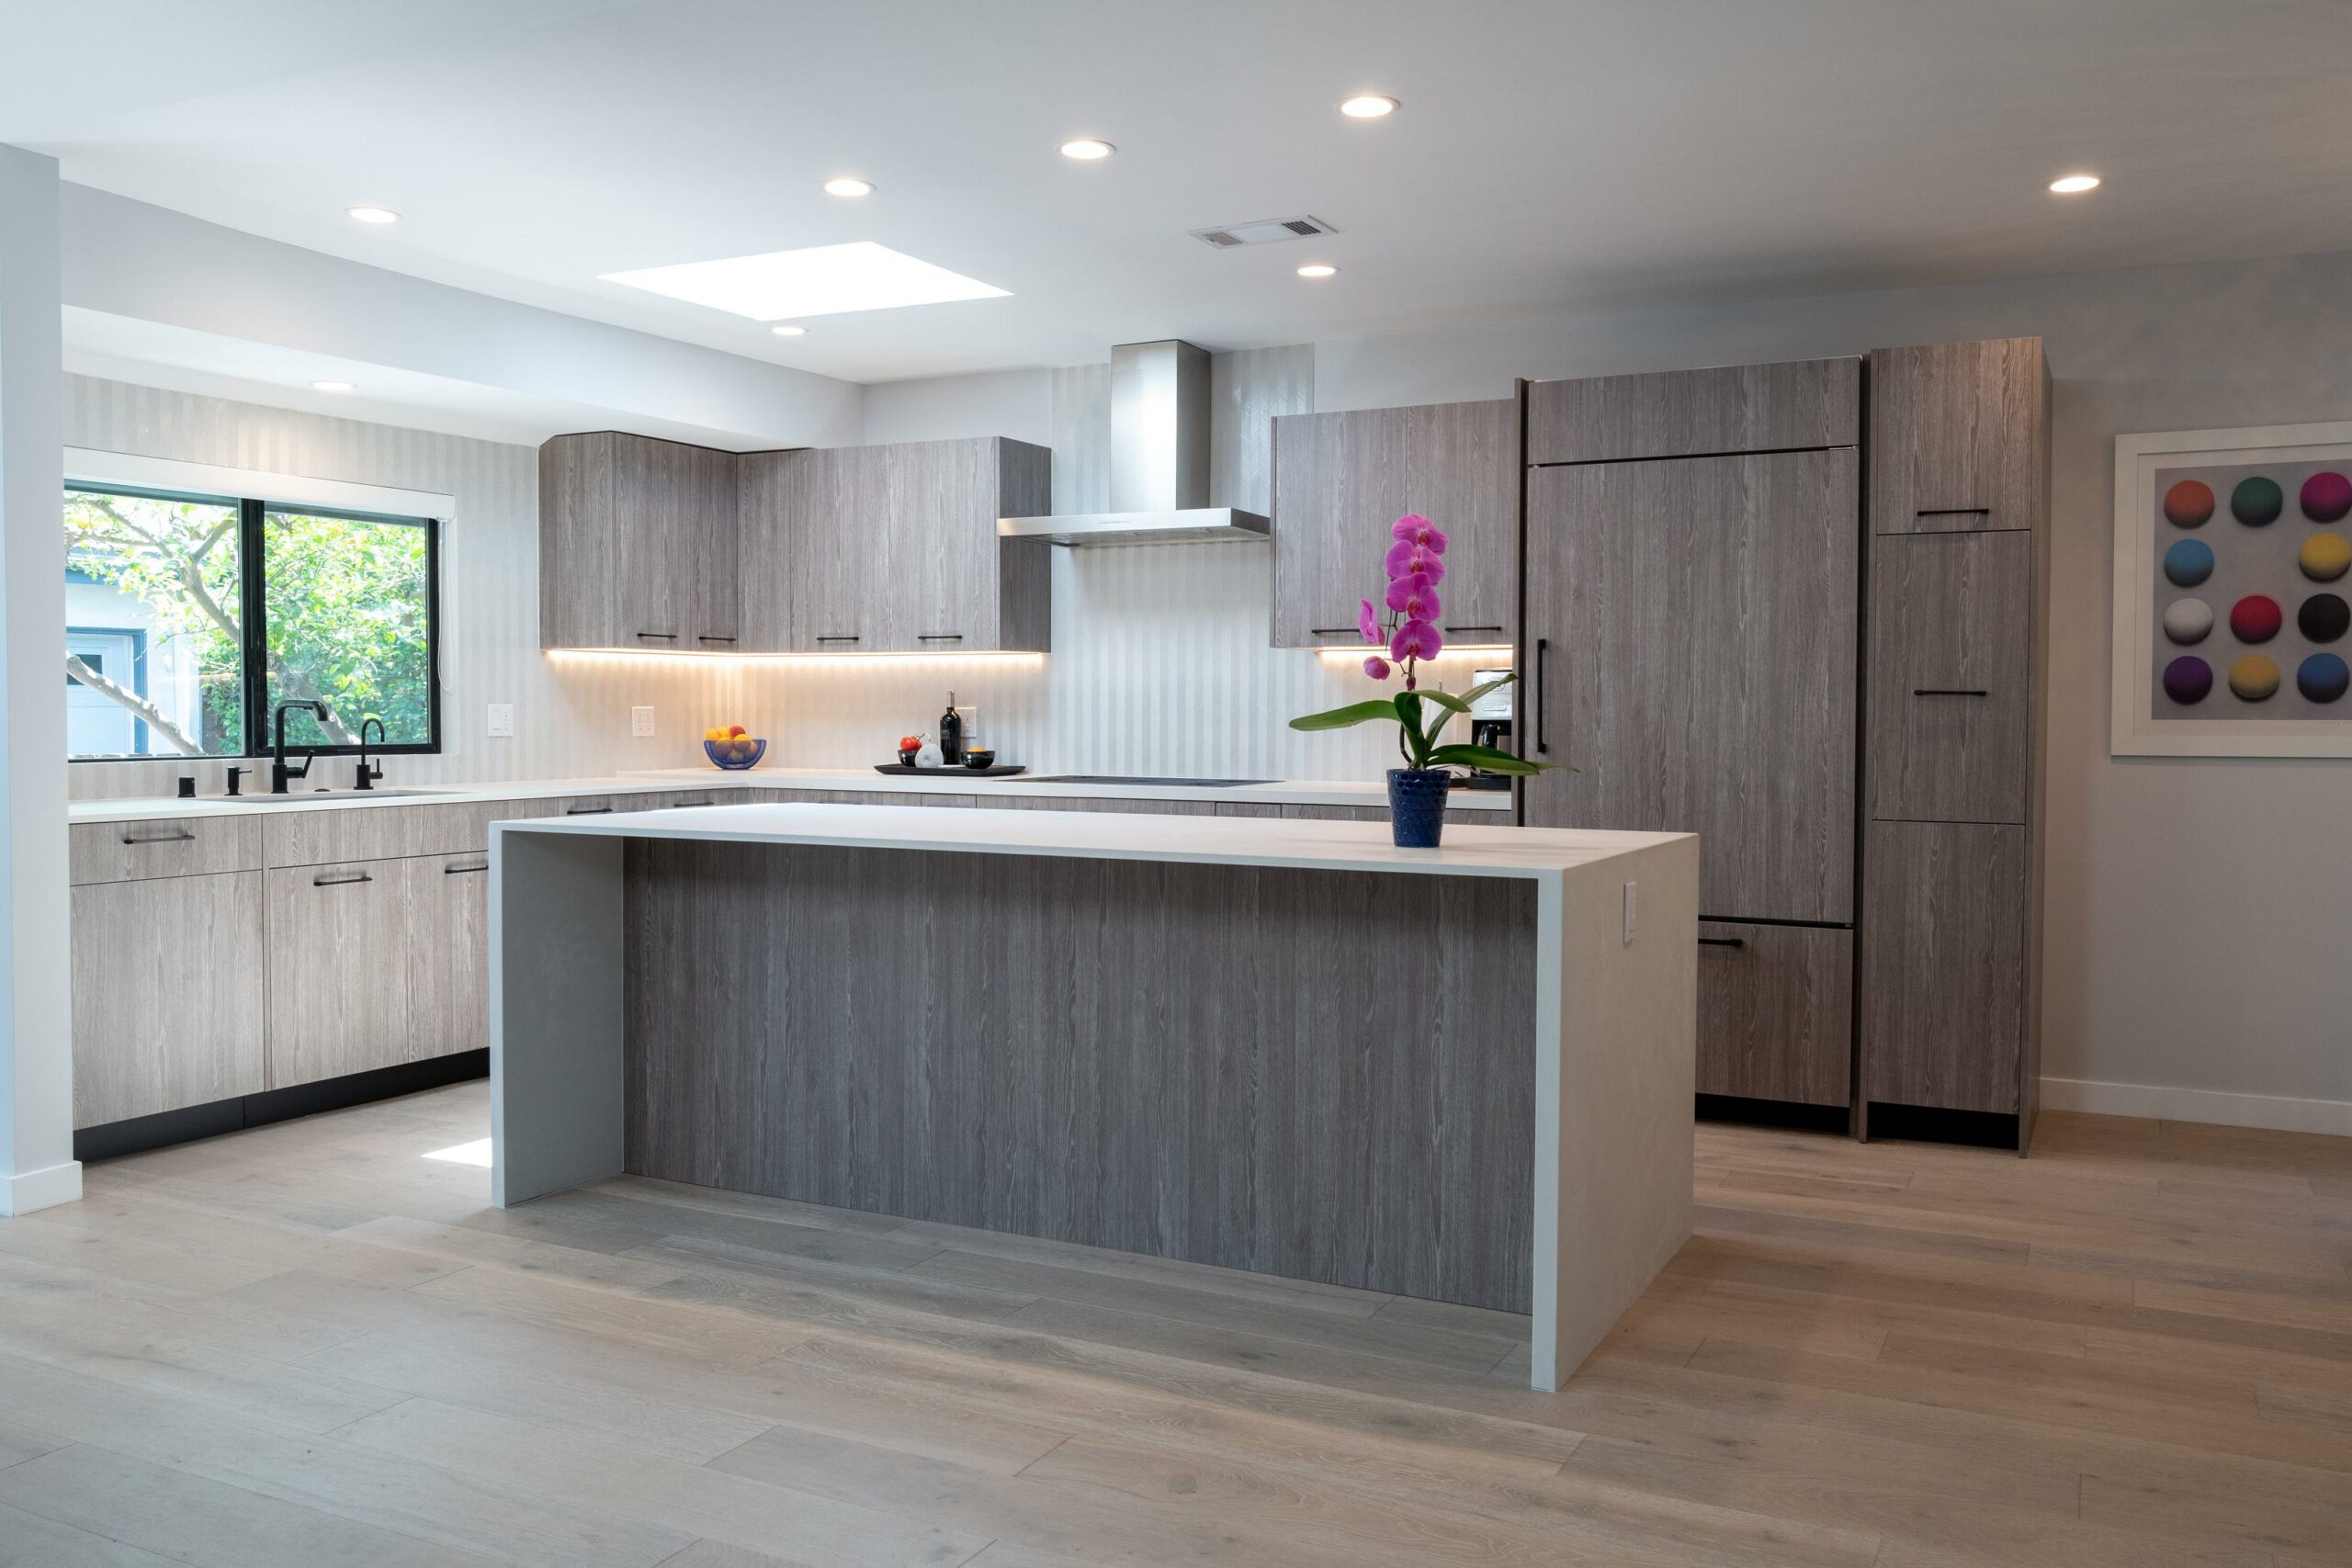 Modern kitchen interior with wood finishes and orchid.